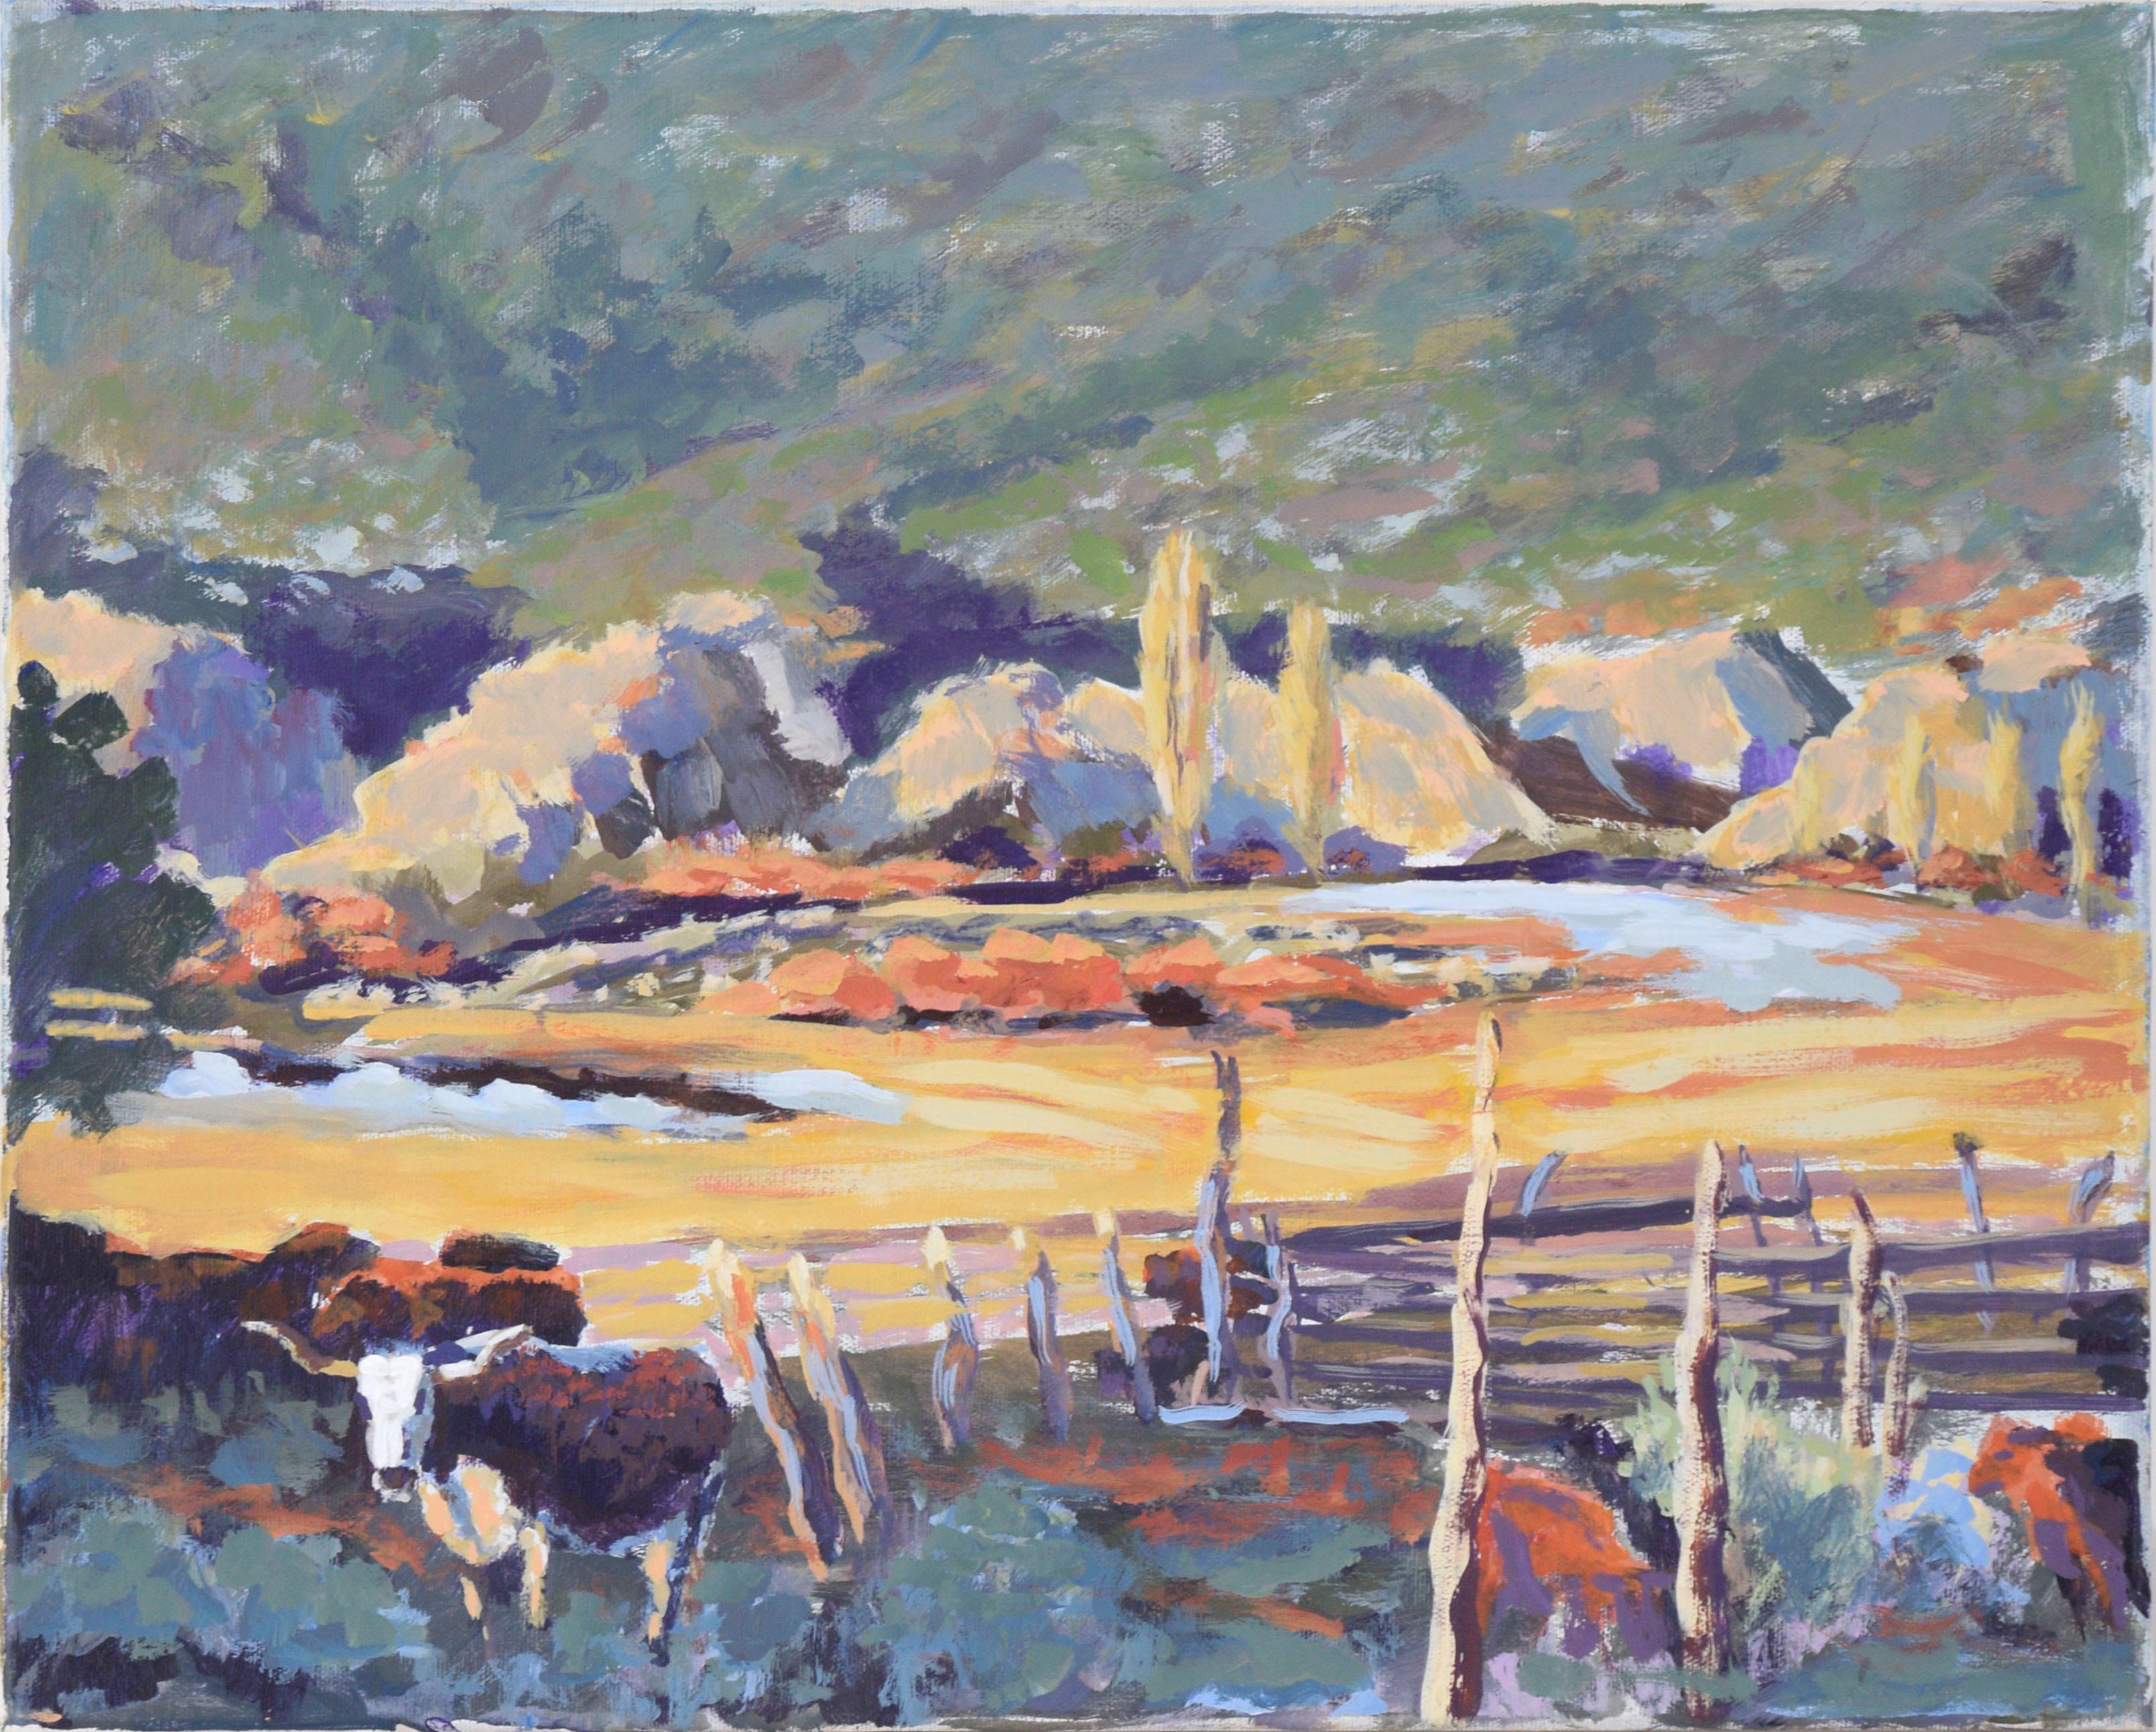 Desert Ranch with Longhorn Steer - Plein Aire Landscape in Acrylic on Canvas - Painting by Nick White